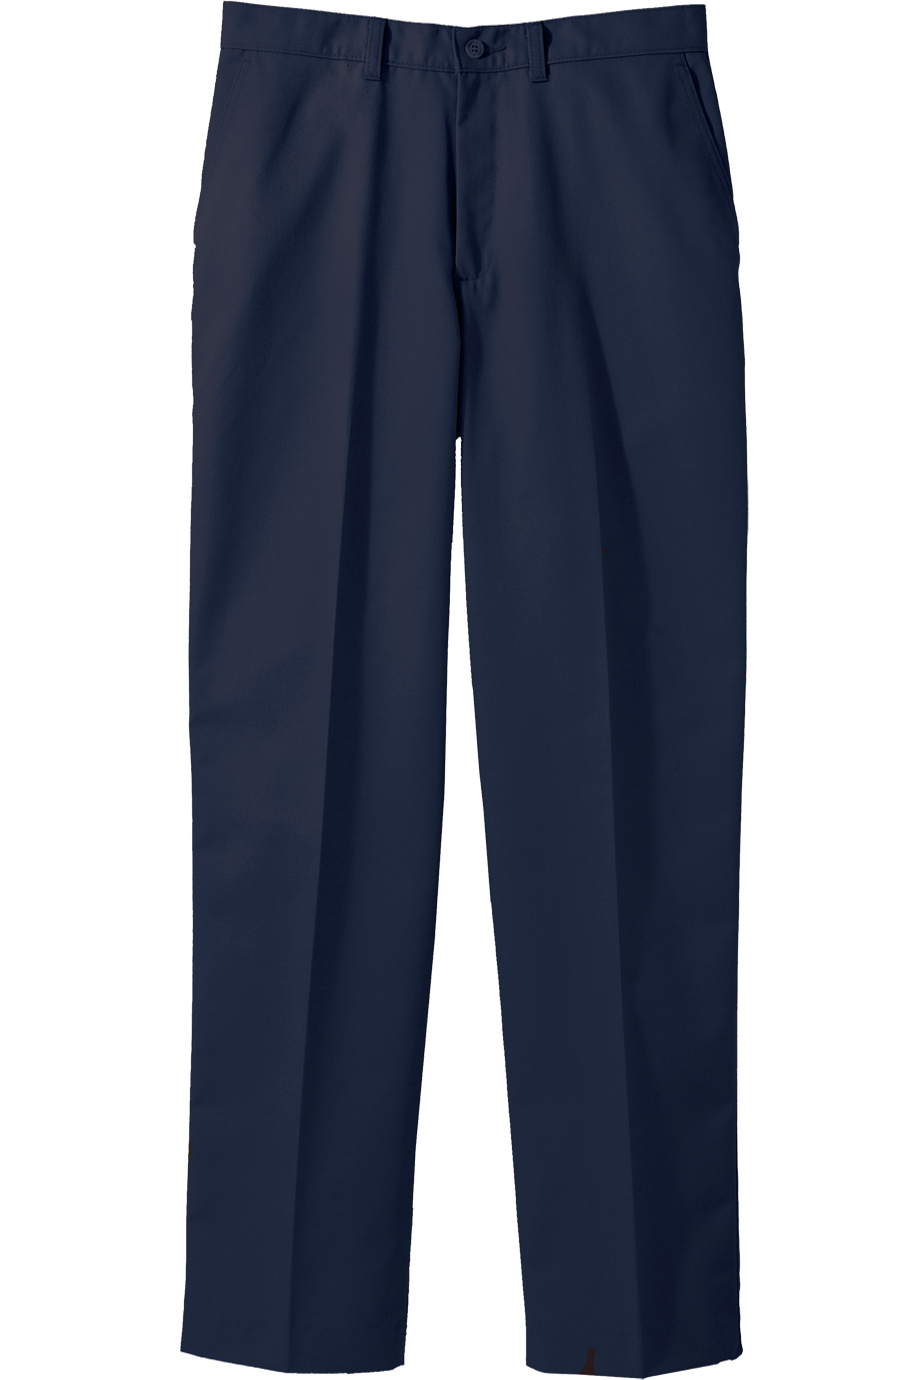 Edwards Men's Big & Tall  Blended Chino Flat Front Pant